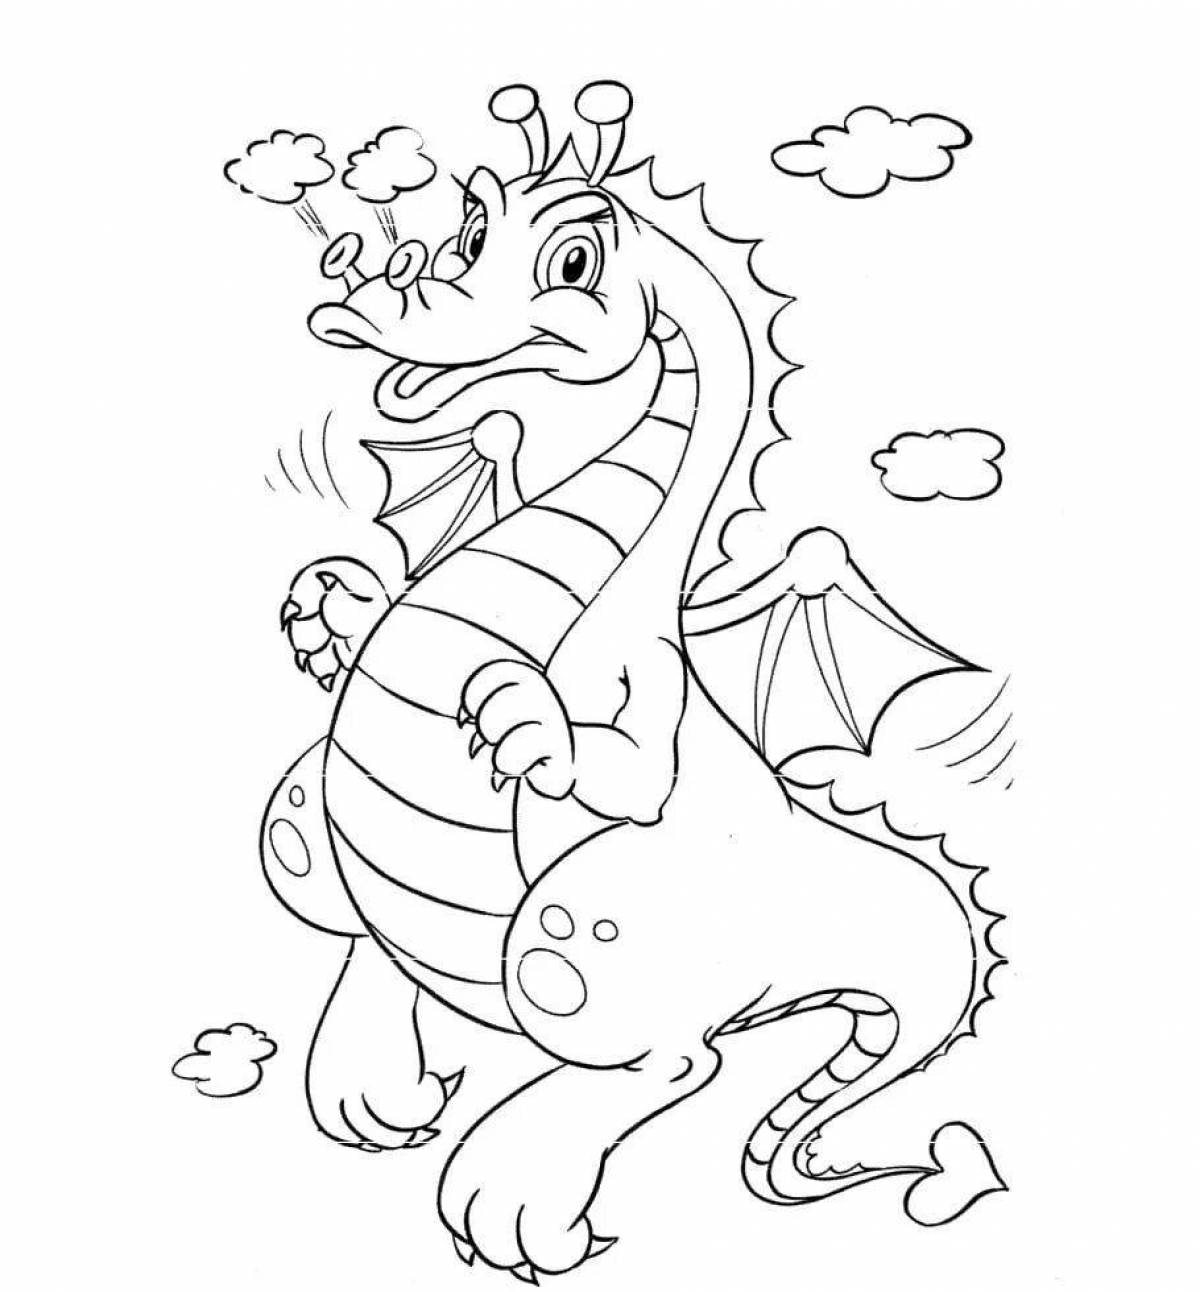 Brilliant year of the dragon coloring page